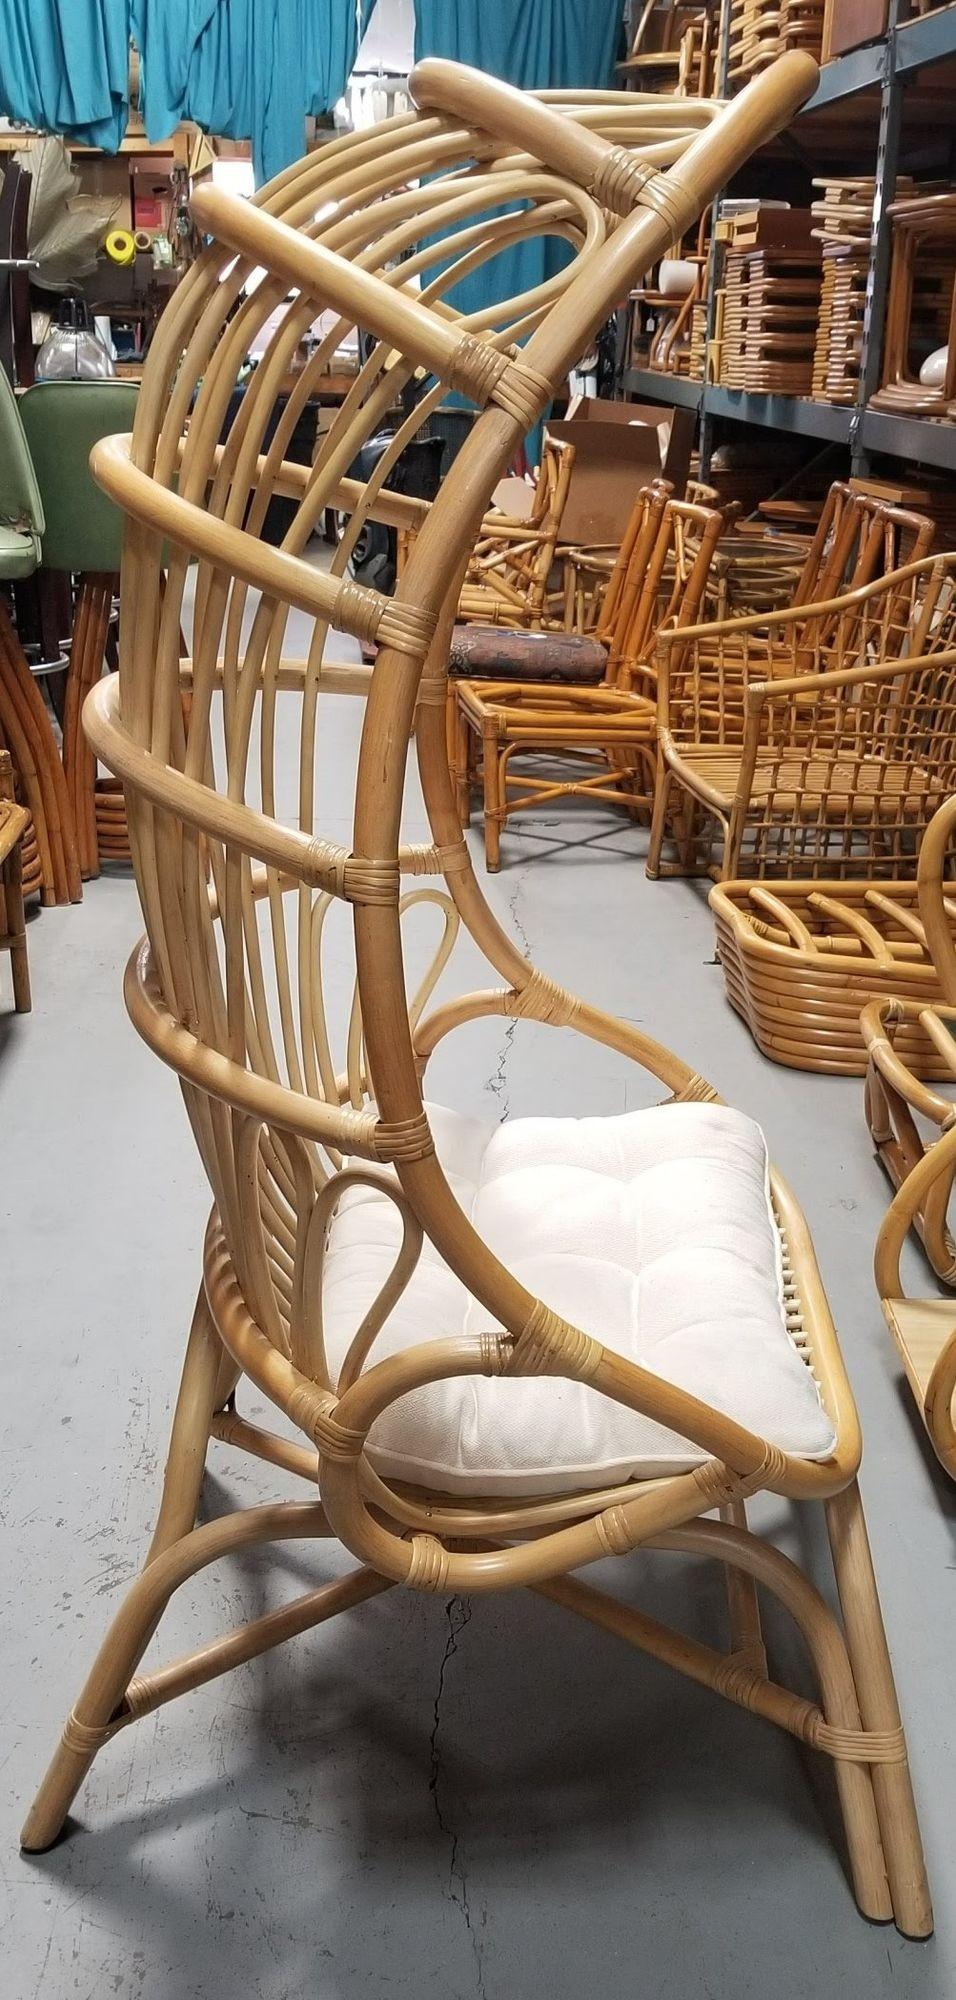 The rattan cocoon chair is a fusion of nature and design, featuring intricate woven patterns that embrace you in comfort. Its curved silhouette creates a private oasis, allowing you to unwind and escape the world. Crafted from durable rattan